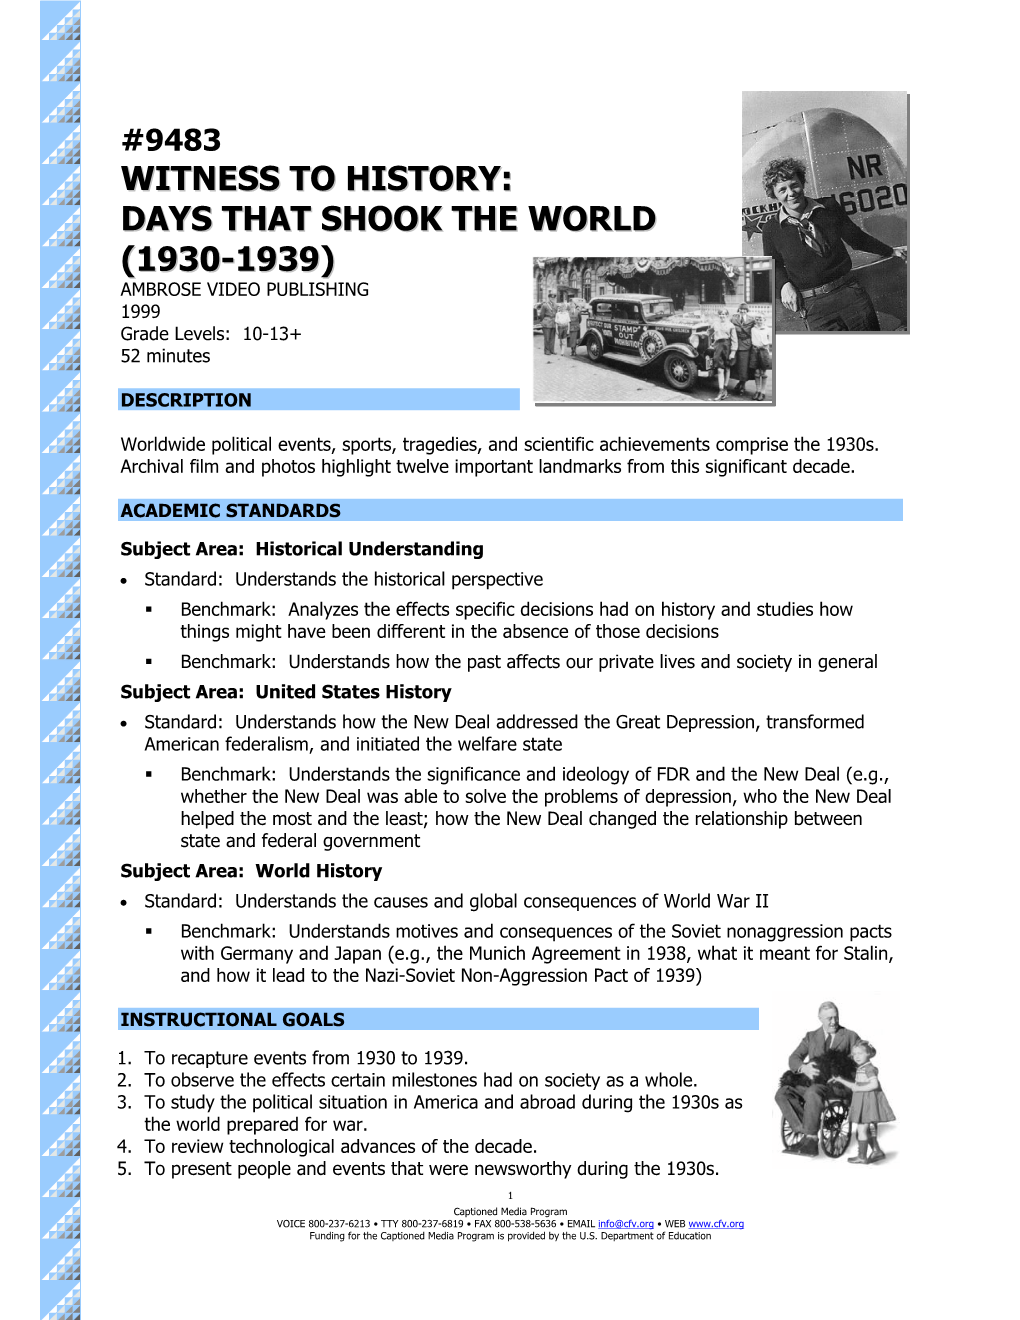 9483 WITNESS to HISTORY: DAYS THAT SHOOK the WORLD (1930-1939) AMBROSE VIDEO PUBLISHING 1999 Grade Levels: 10-13+ 52 Minutes